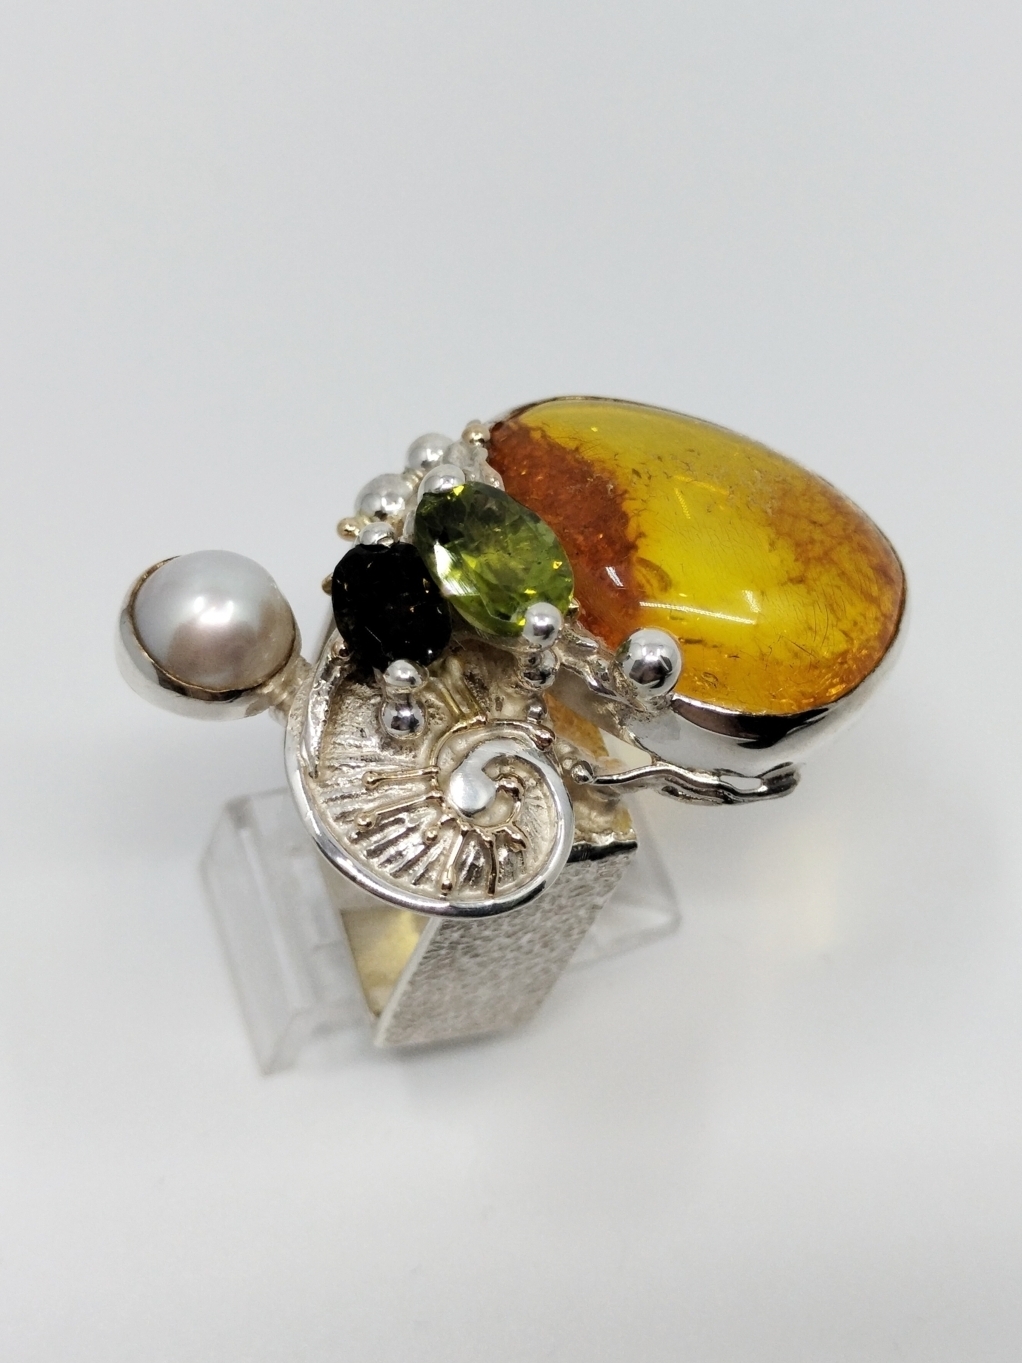 original maker's handcrafted jewellery, gregory pyra piro ring 84942, sterling silver and 14 karat gold, amber, peridot, green tourmaline, pearl, art nouveau inspired fashion jewelry, jewellery with natural pearls and semi precious stones, contemporary jewelry from silver and gold, art jewellery with colour stones, contemporary jewelry with pearls and color stones, jewellery made from silver and gold with natural pearls and natural gemstones, shopping for diamonds and designer jewellery, accessories with color stones and pearls, artisan handcrafted jewellery with natural gemstones and natural pearls, jewelry made first hand, art and craft gallery artisan handcrafted jewellery for sale, jewellery with ocean and seashell theme